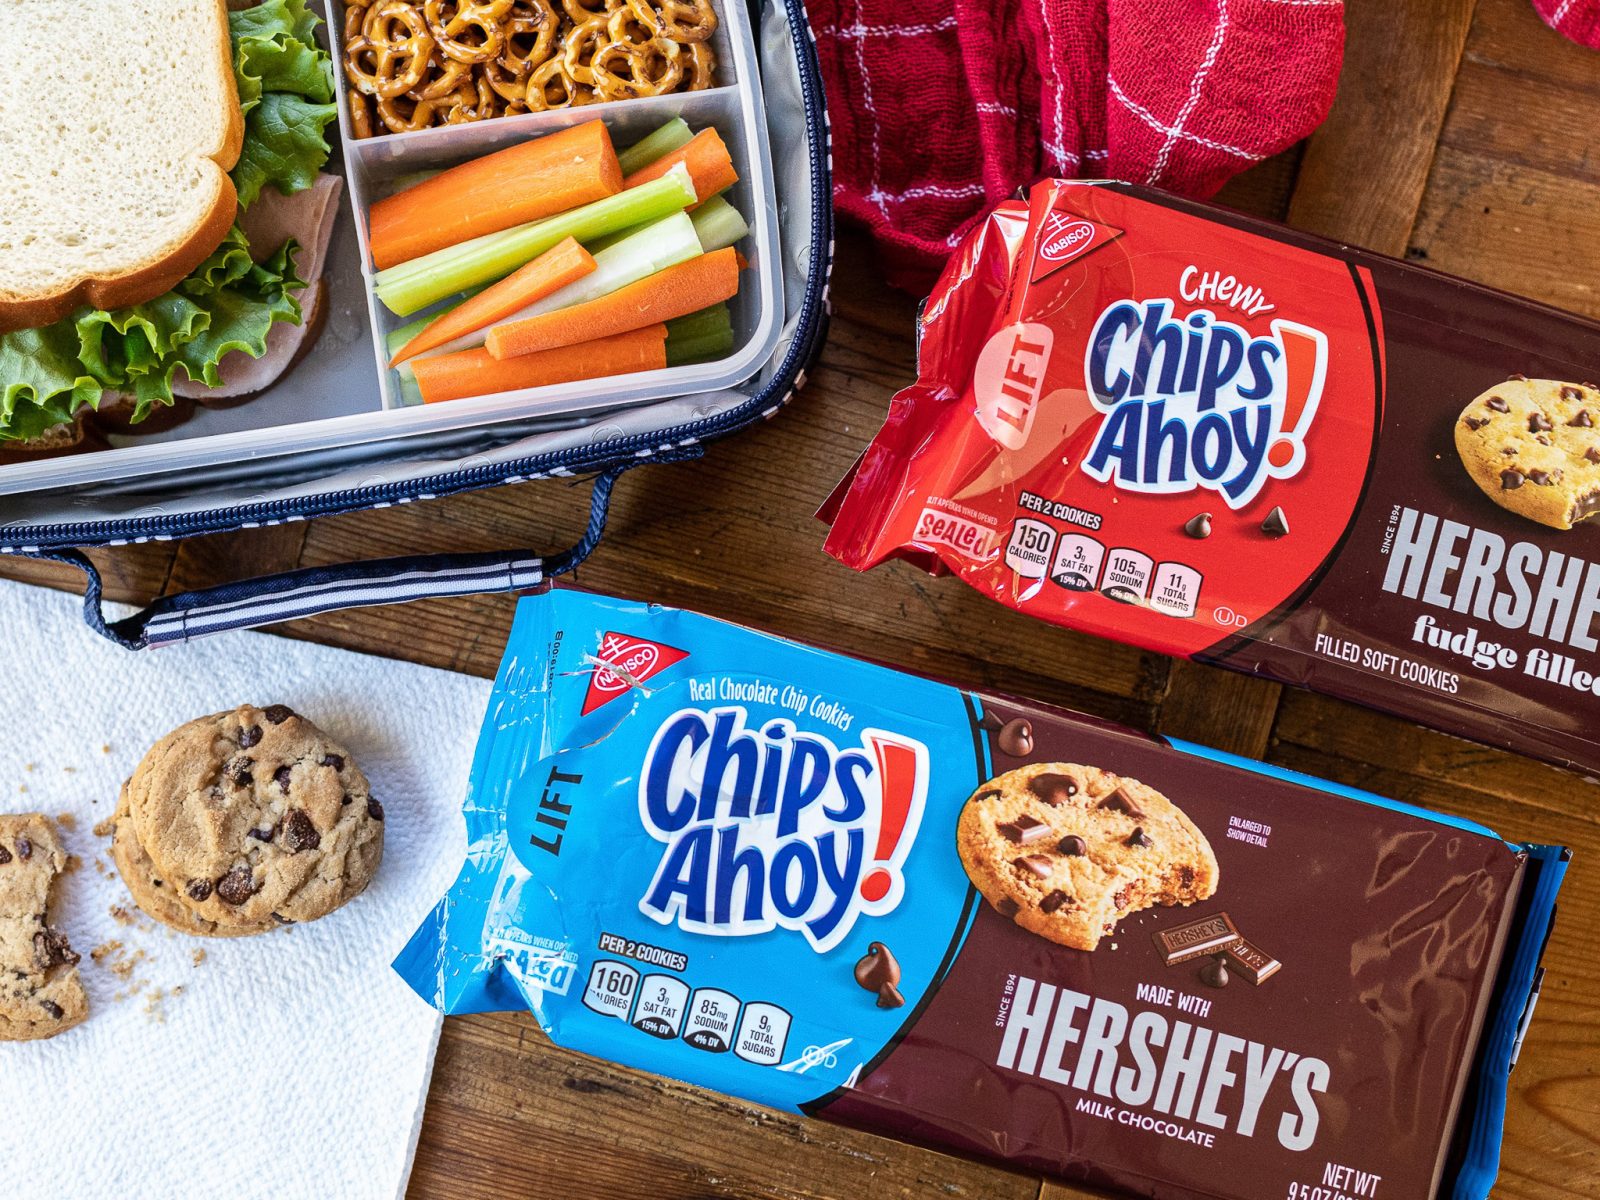 Get Nabisco Chips Ahoy! Hershey’s or Fudge Filled Cookies For As Low As 85¢ At Publix